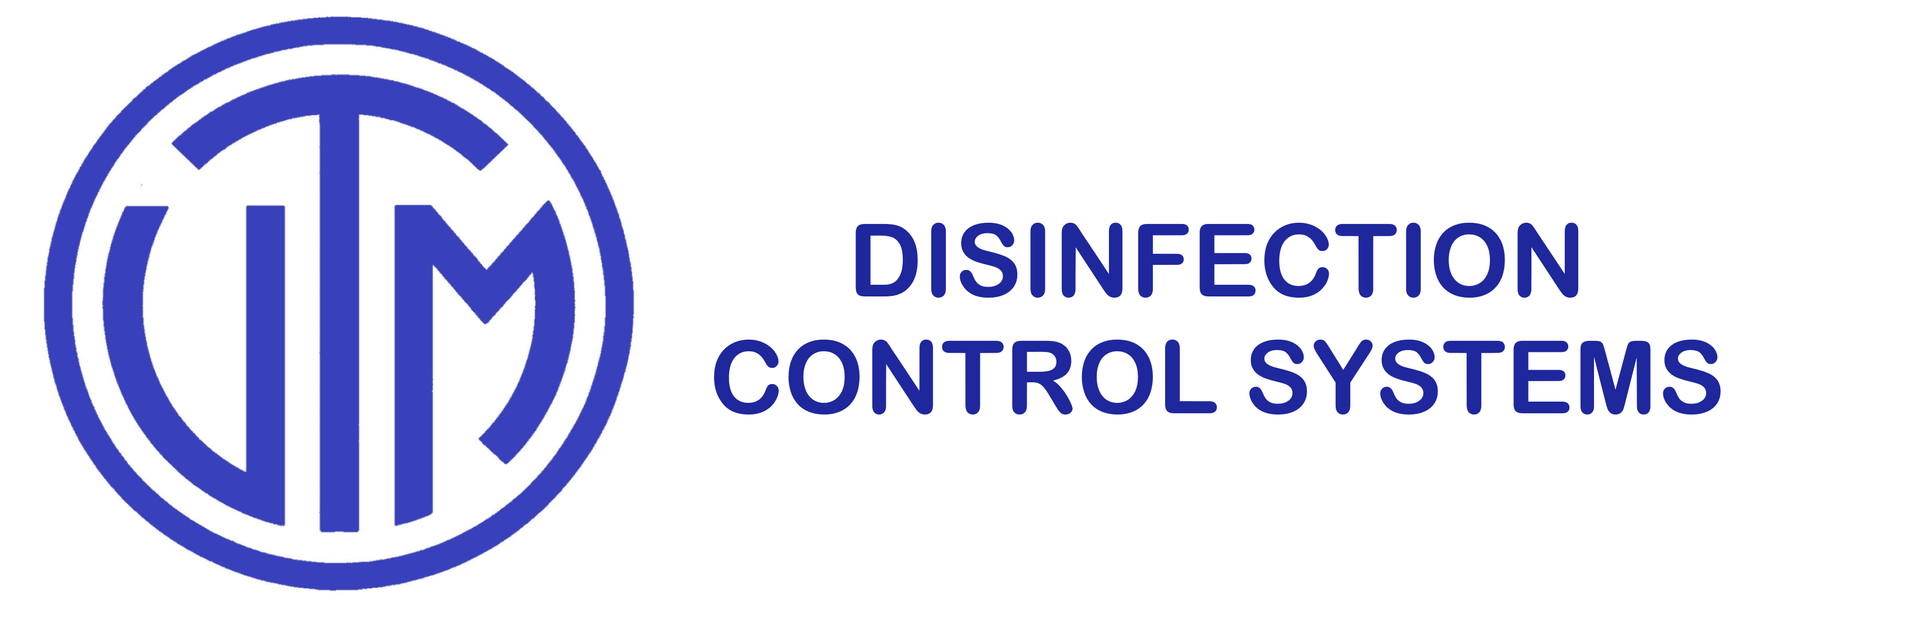 VTM Disinfection Control Systems